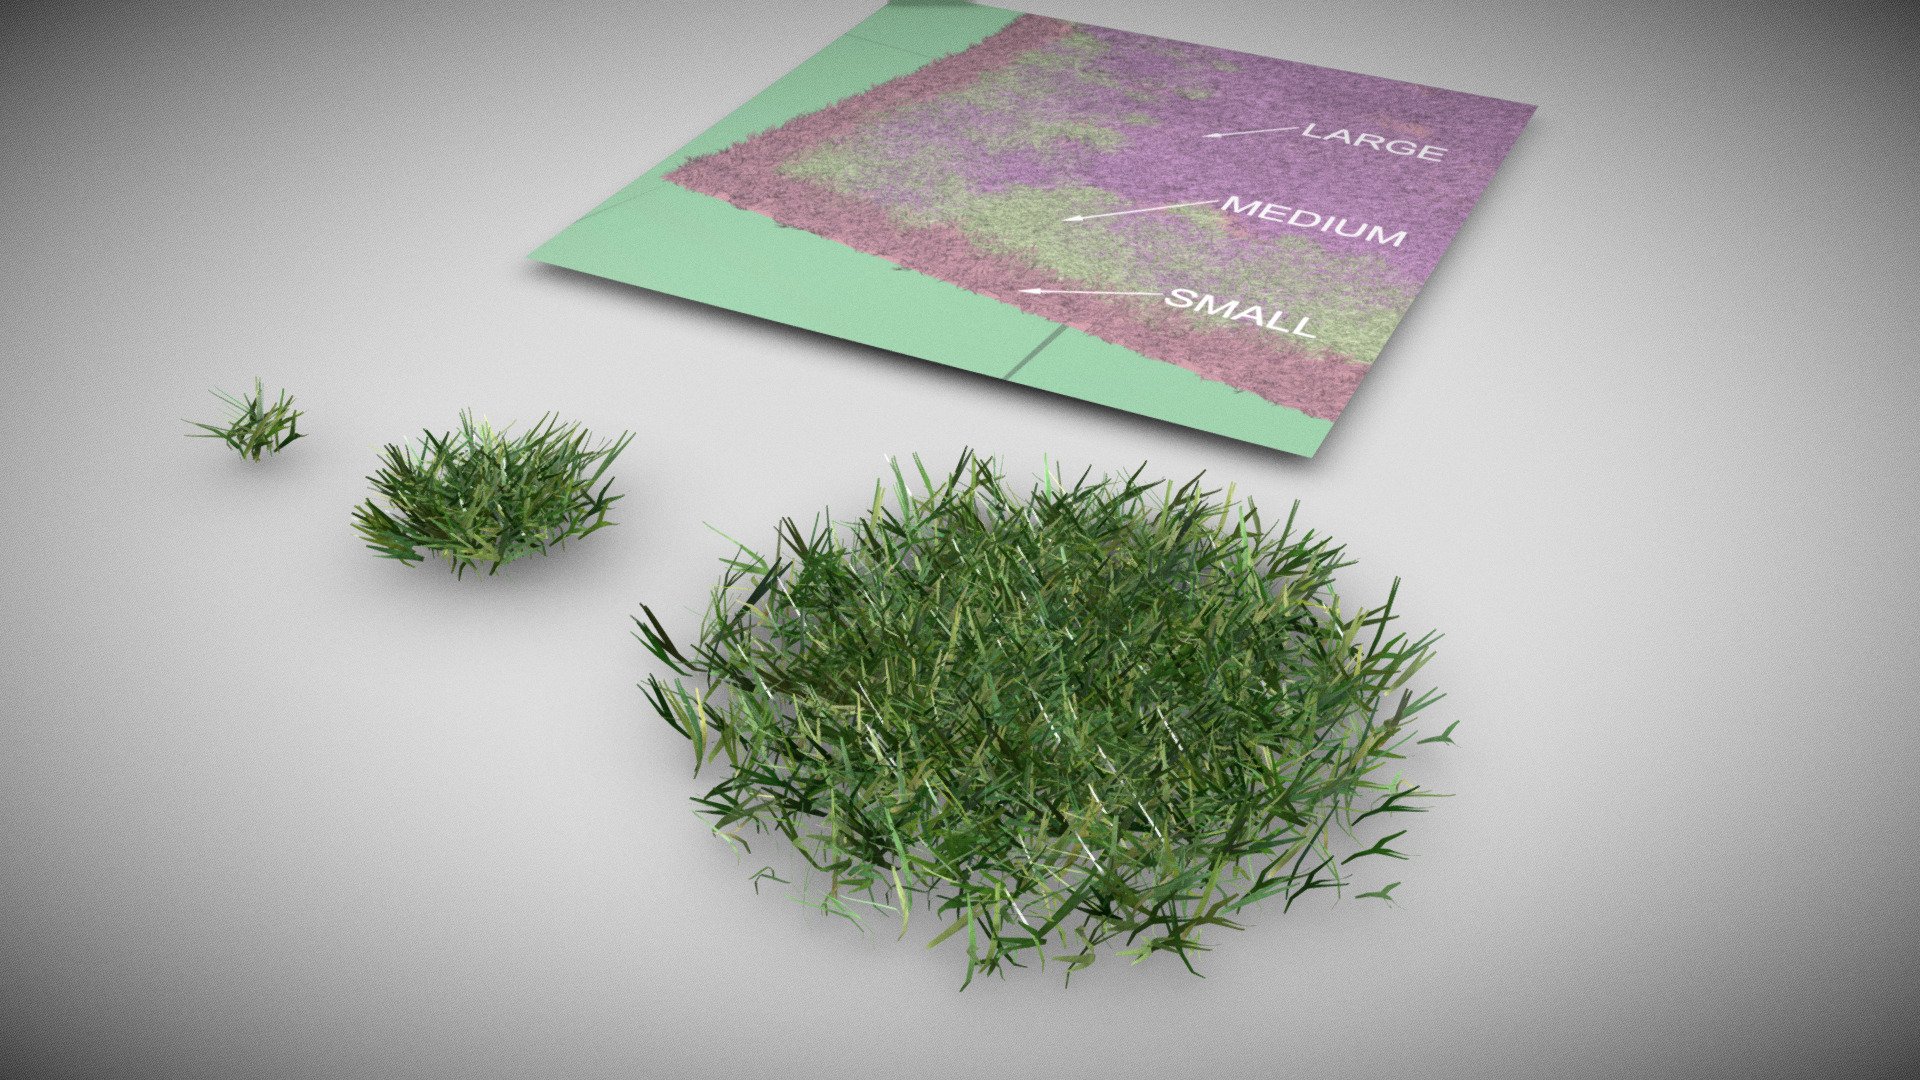 Simple grass models for a lawn.

Small, medium and large clumps so you can fill the edge and tight corners with the smaller model and  cover larger areas with the larger model.

Renders efficeintly with instancing 3d model